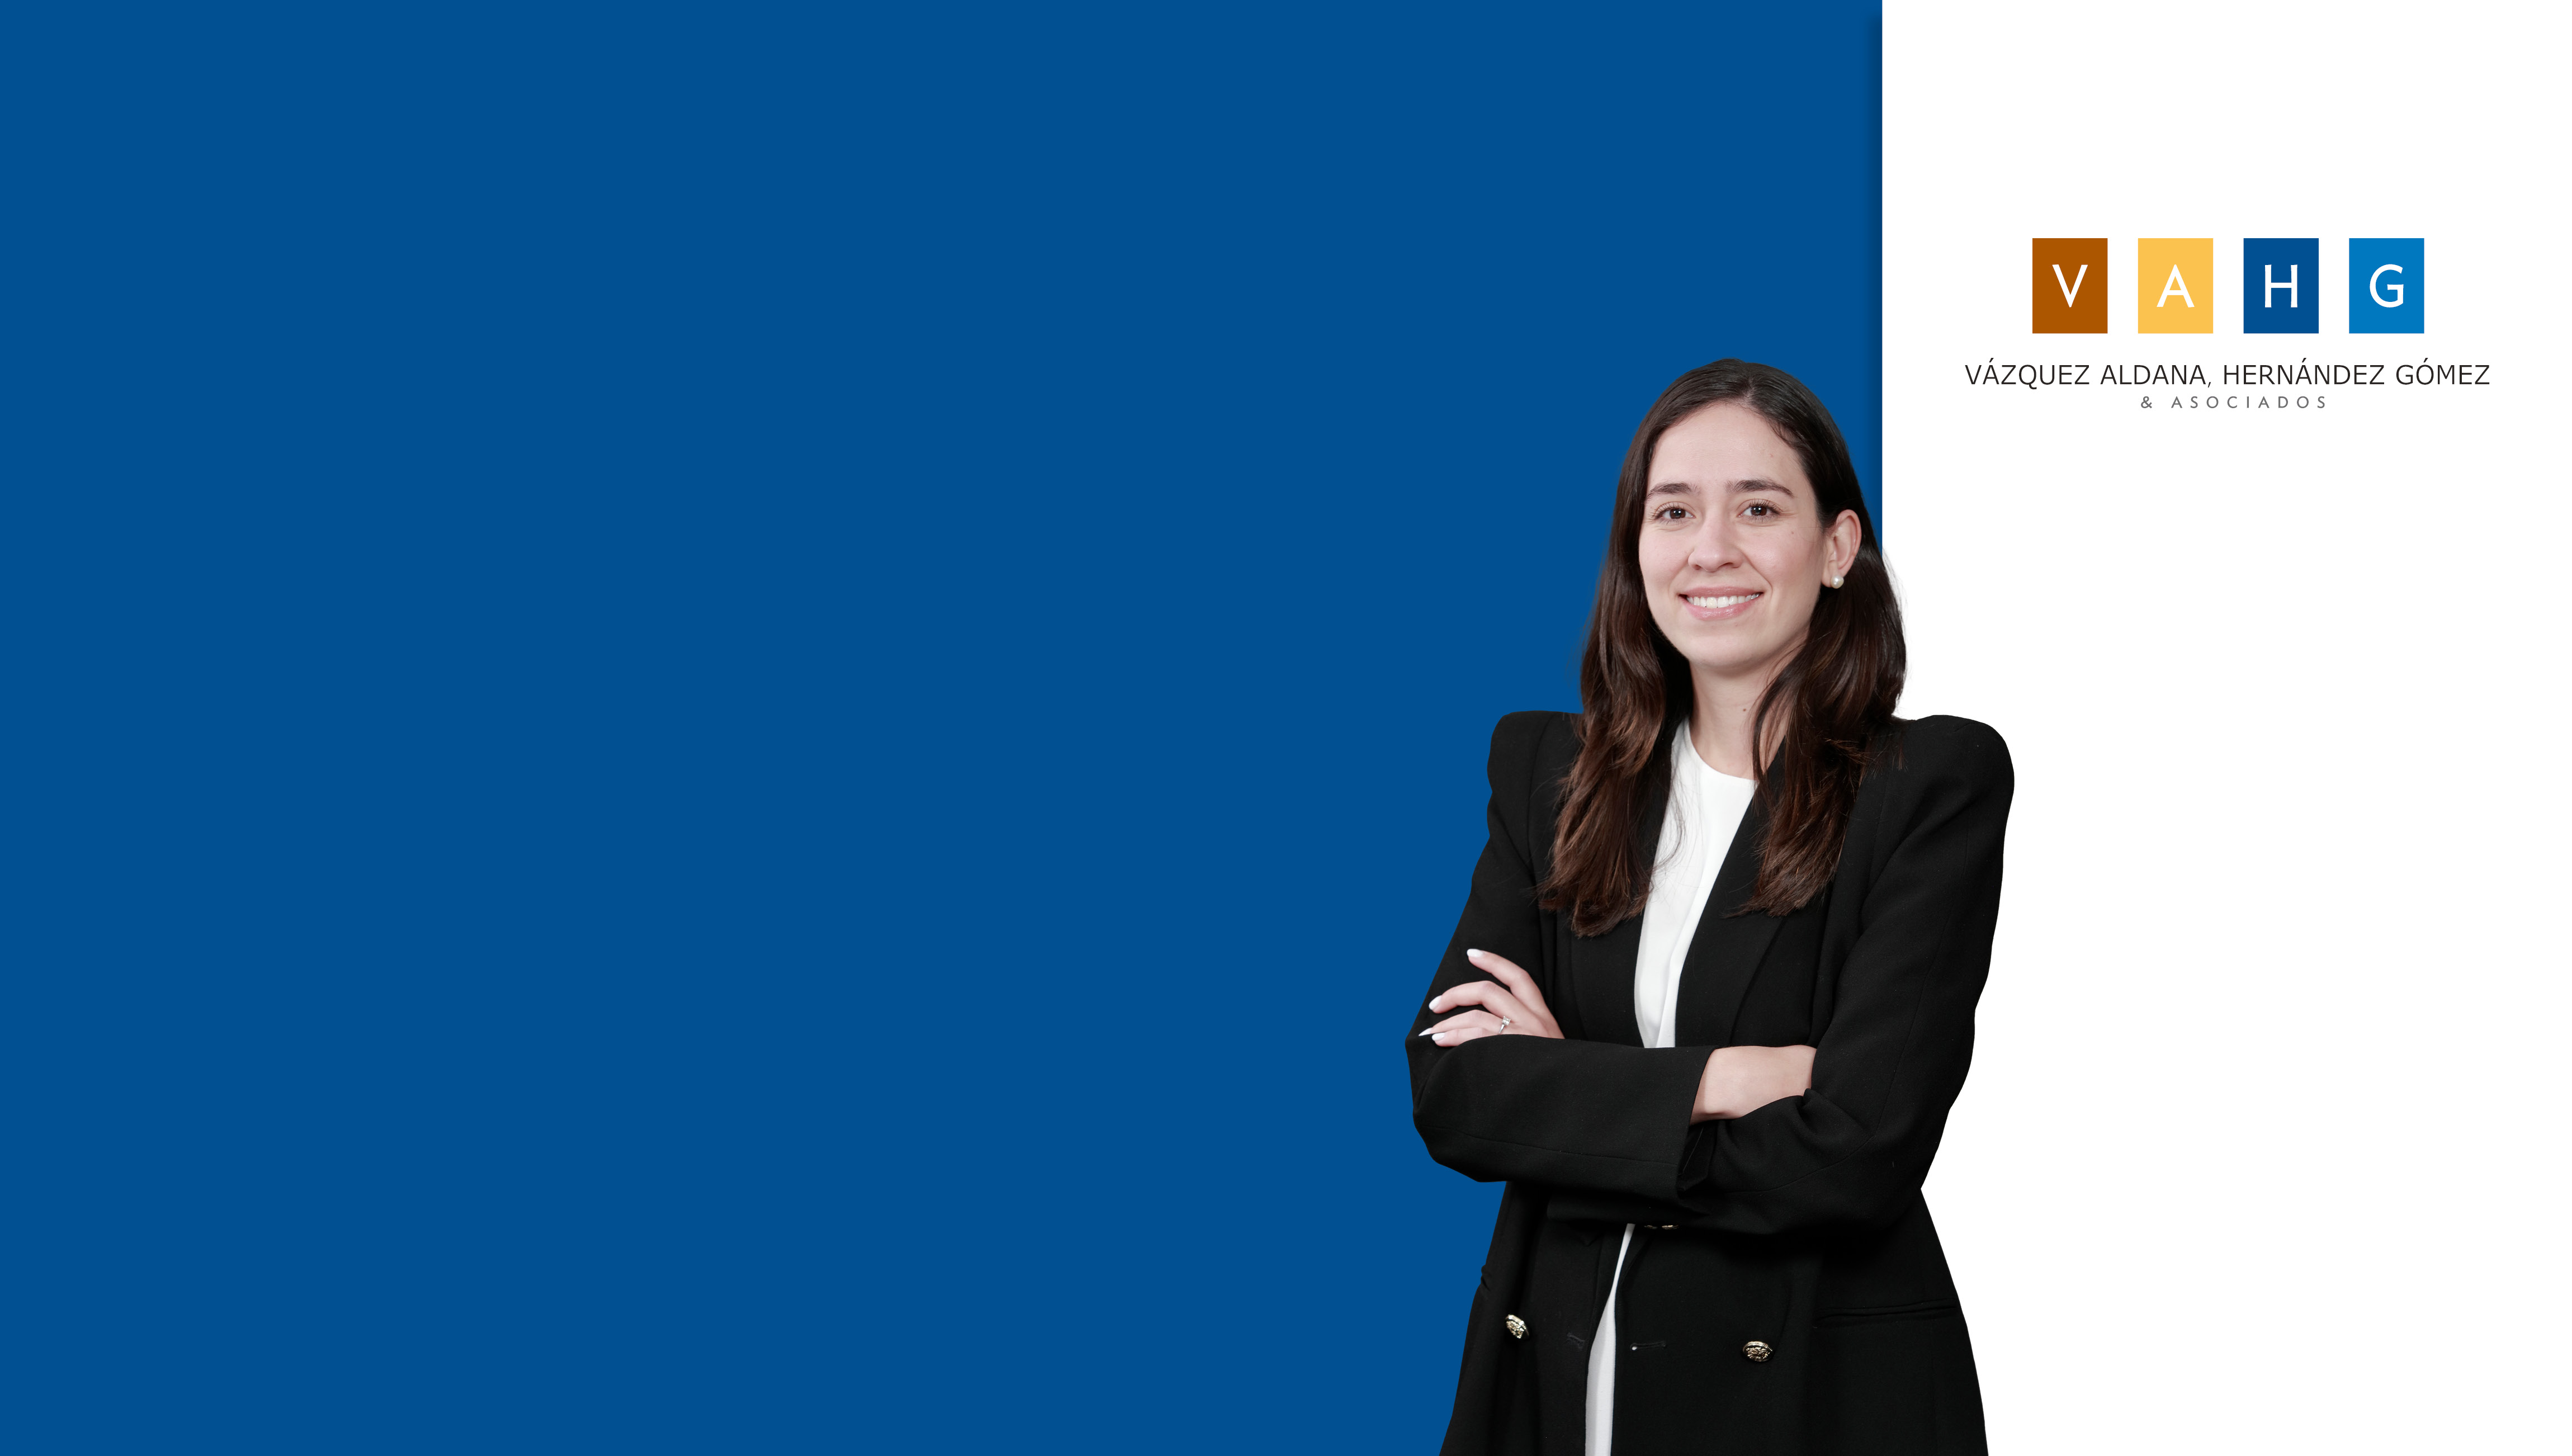 VAHG is pleased to announce the appointment of Ana Karen Inzunza Sánchez as Partner of the Firm